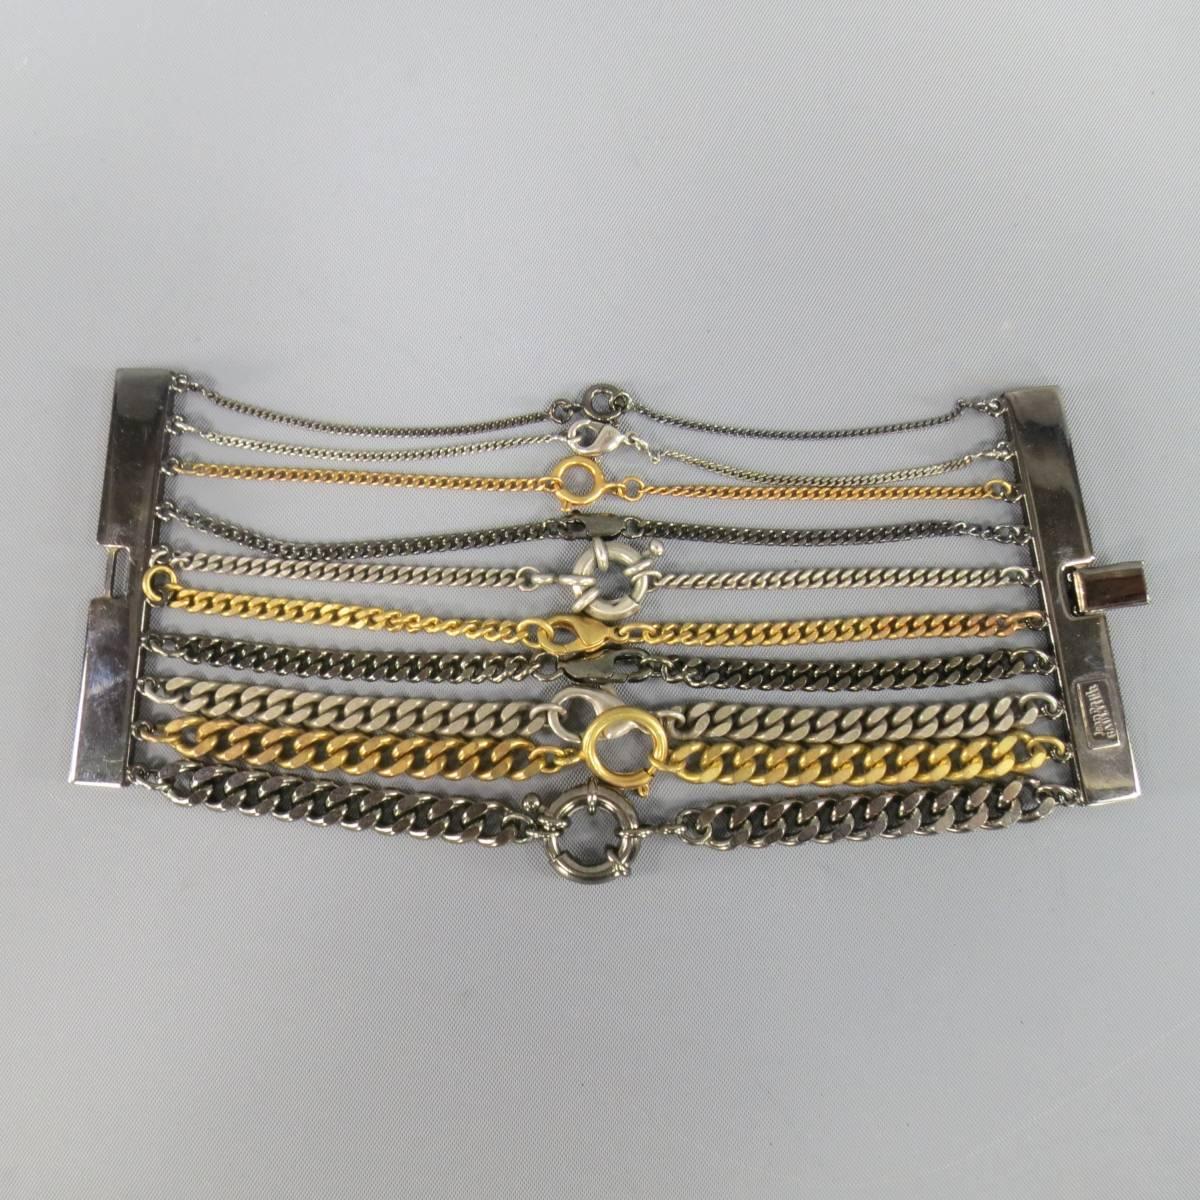 Fabulous vintage JEAN PAUL GAULTIER cuff bracelet features gunmetal brass bars with various sized silver and gold clasped chains.Made in Italy.
 
New with Tags.
 
Length: 6.5 in.
Width: 2.75 in.